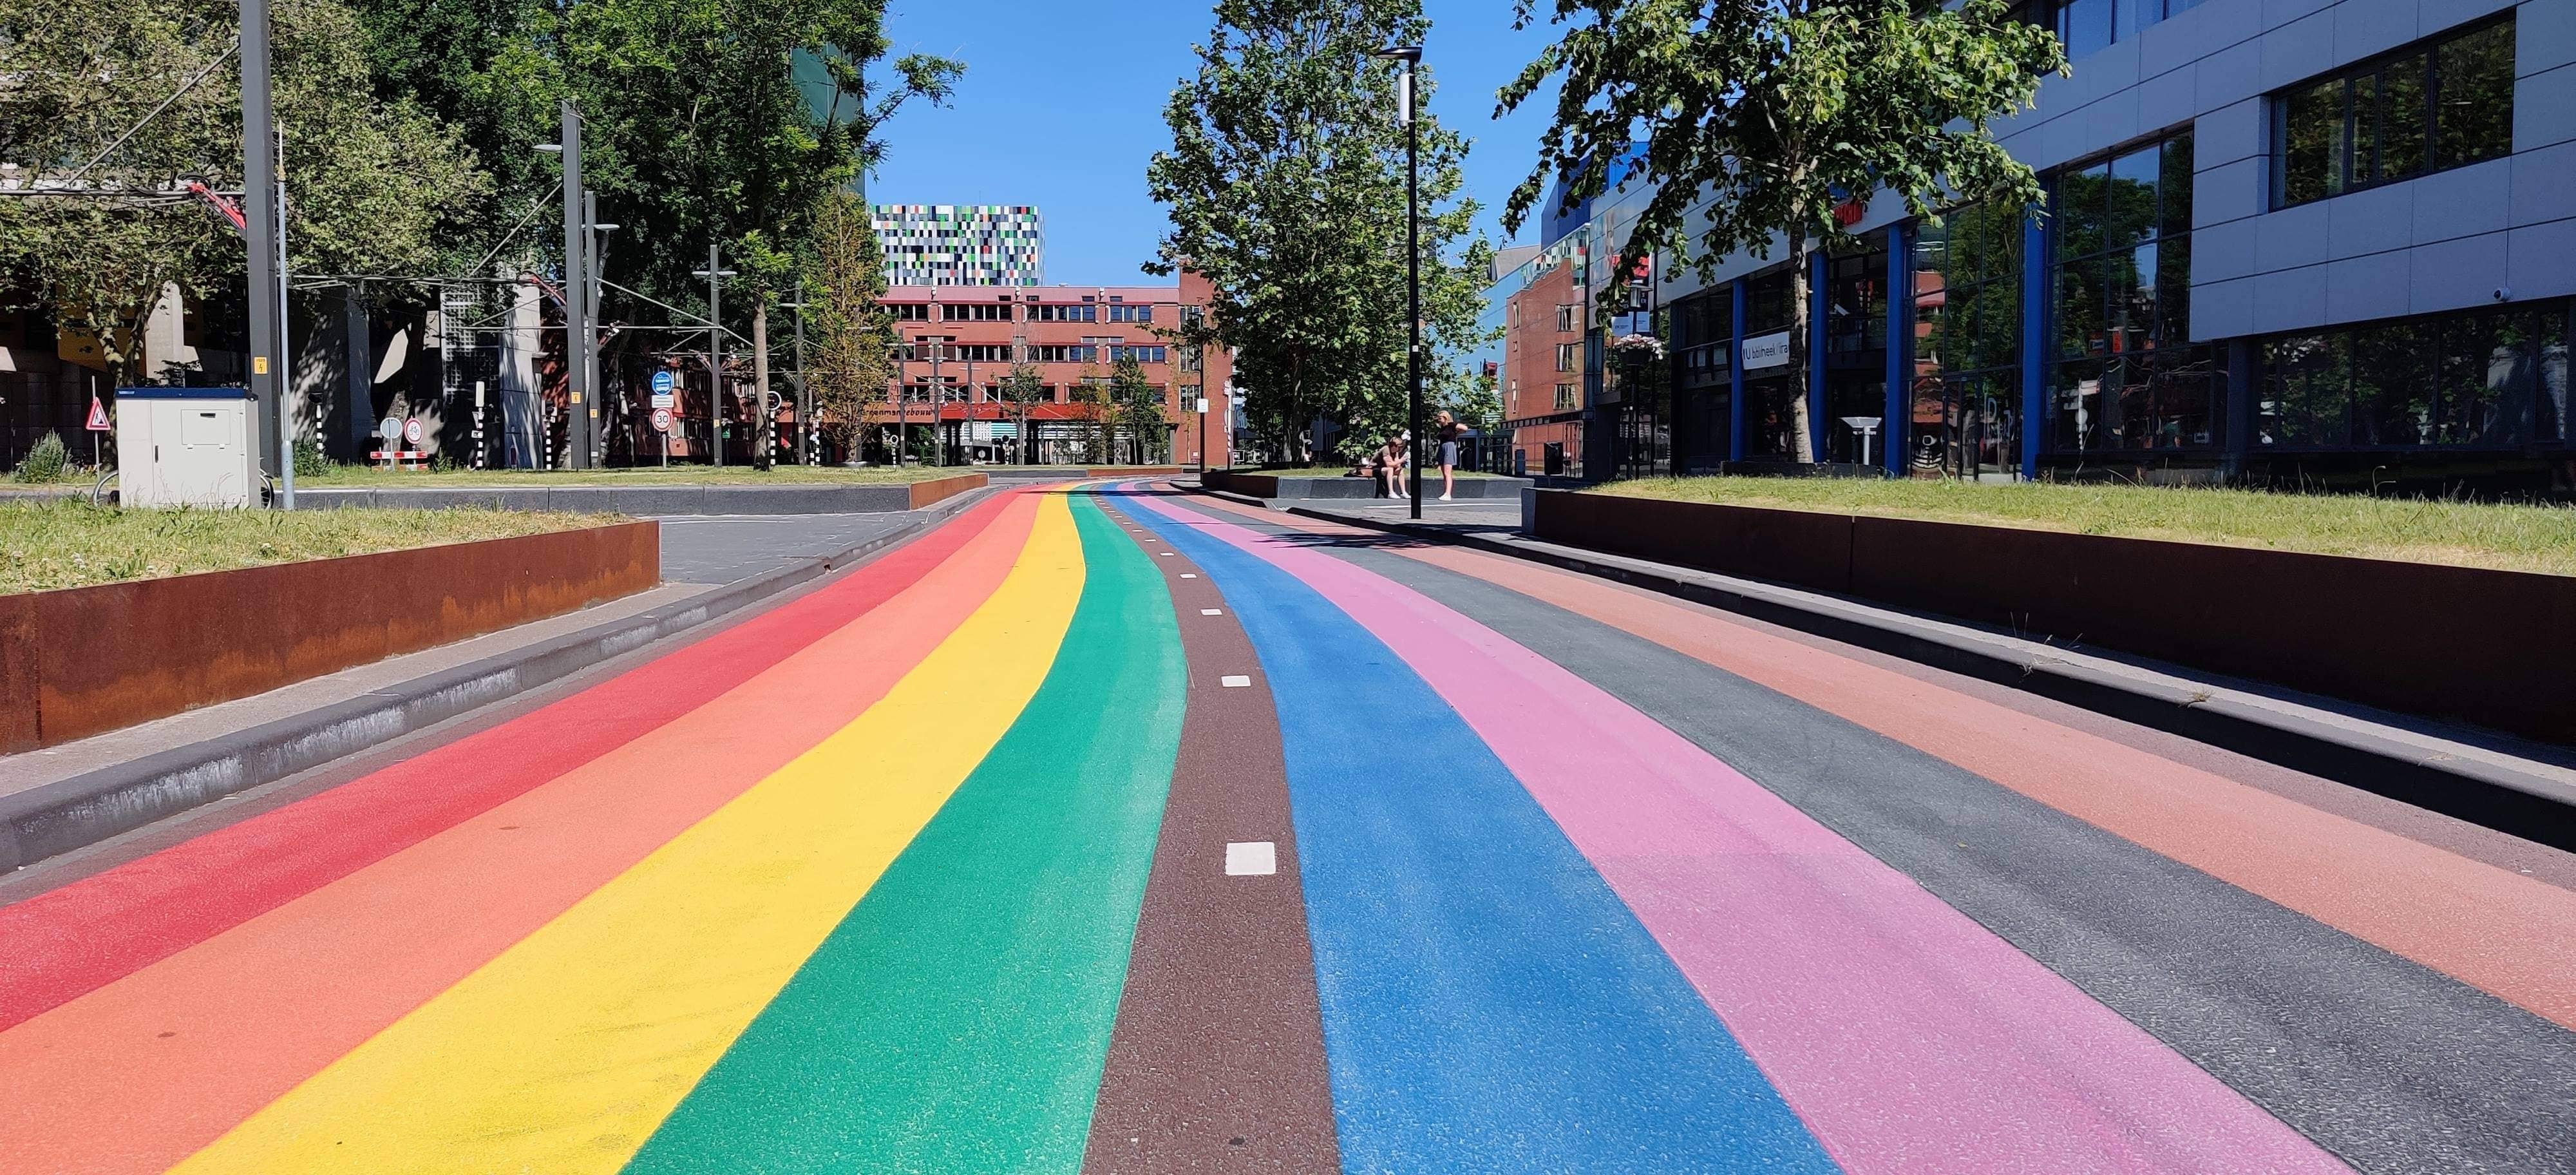 Although the rainbow flag applied to the cycle path is a symbol of the LGBTQI+ community, all parties involved want the cycle path to give a signal about diversity and inclusion in the broadest sense of the word.